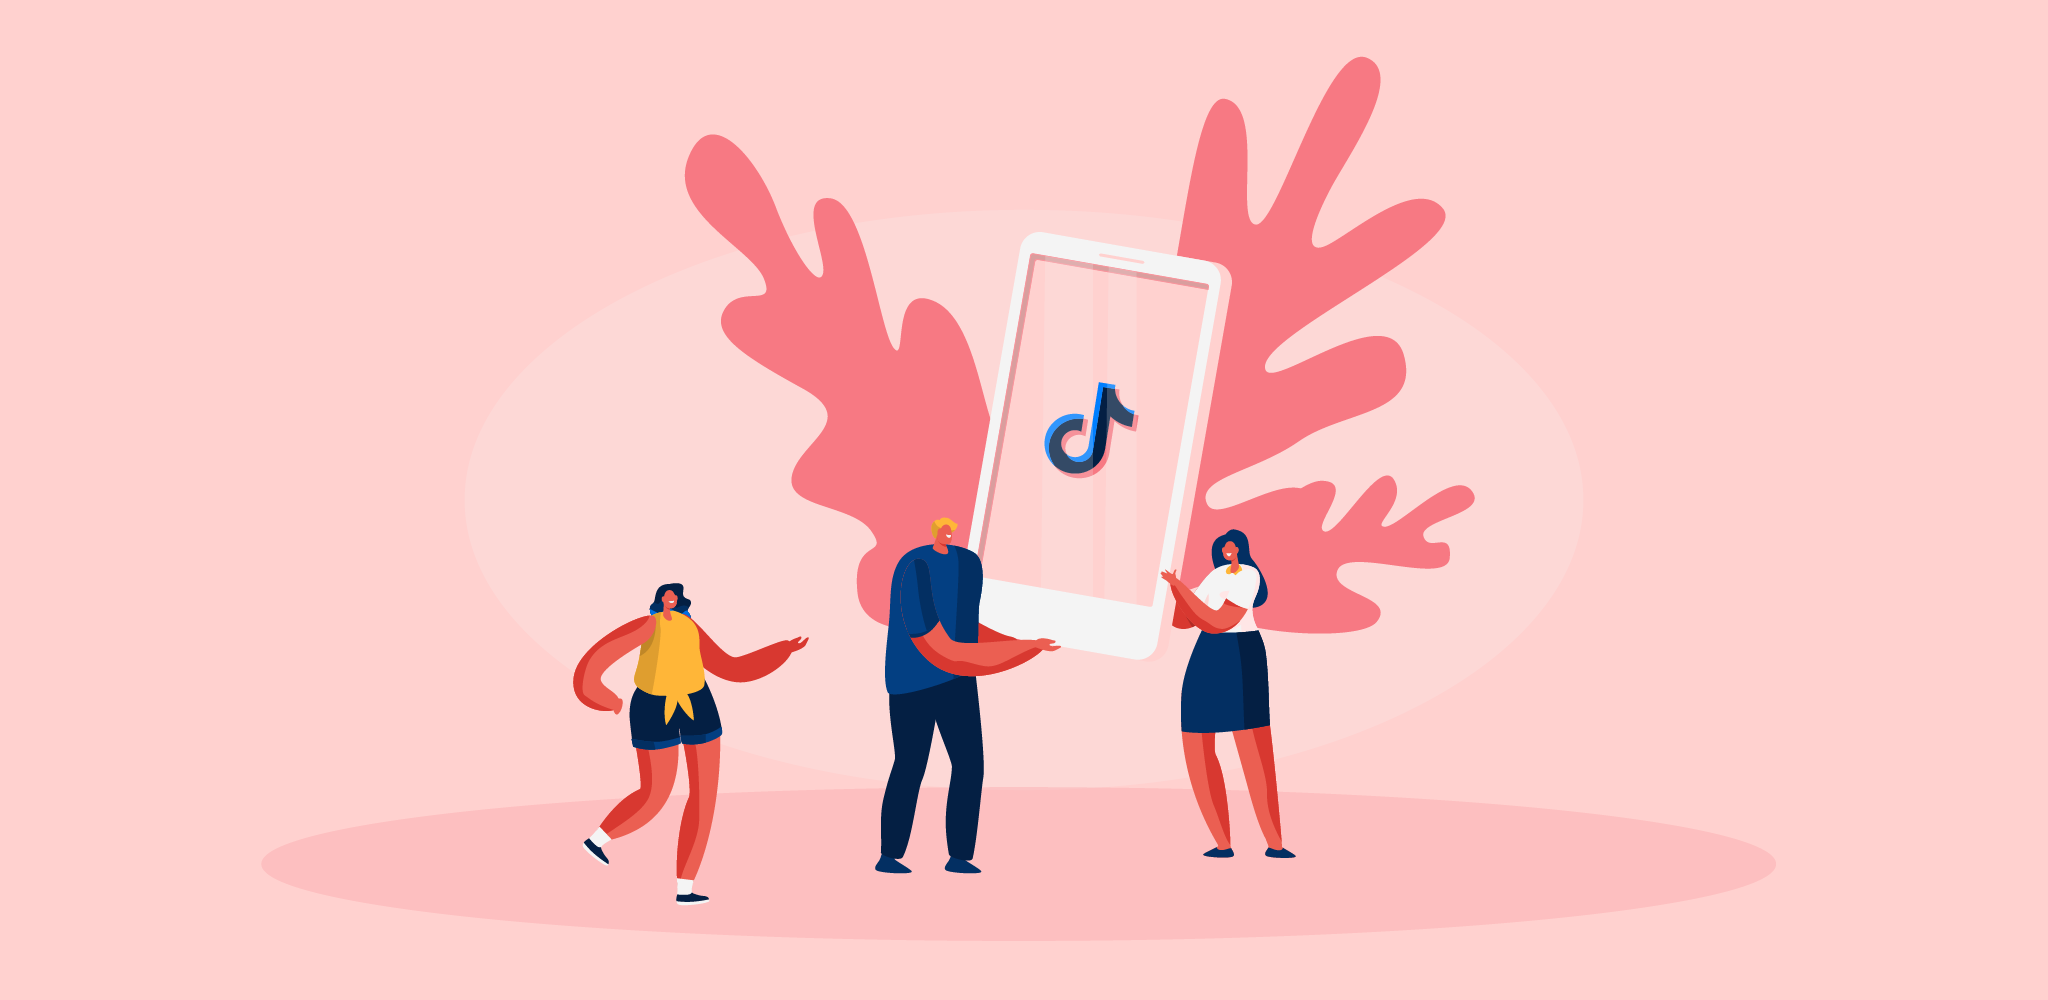 8 TikTok Trends to Fuel Your Content for 2023